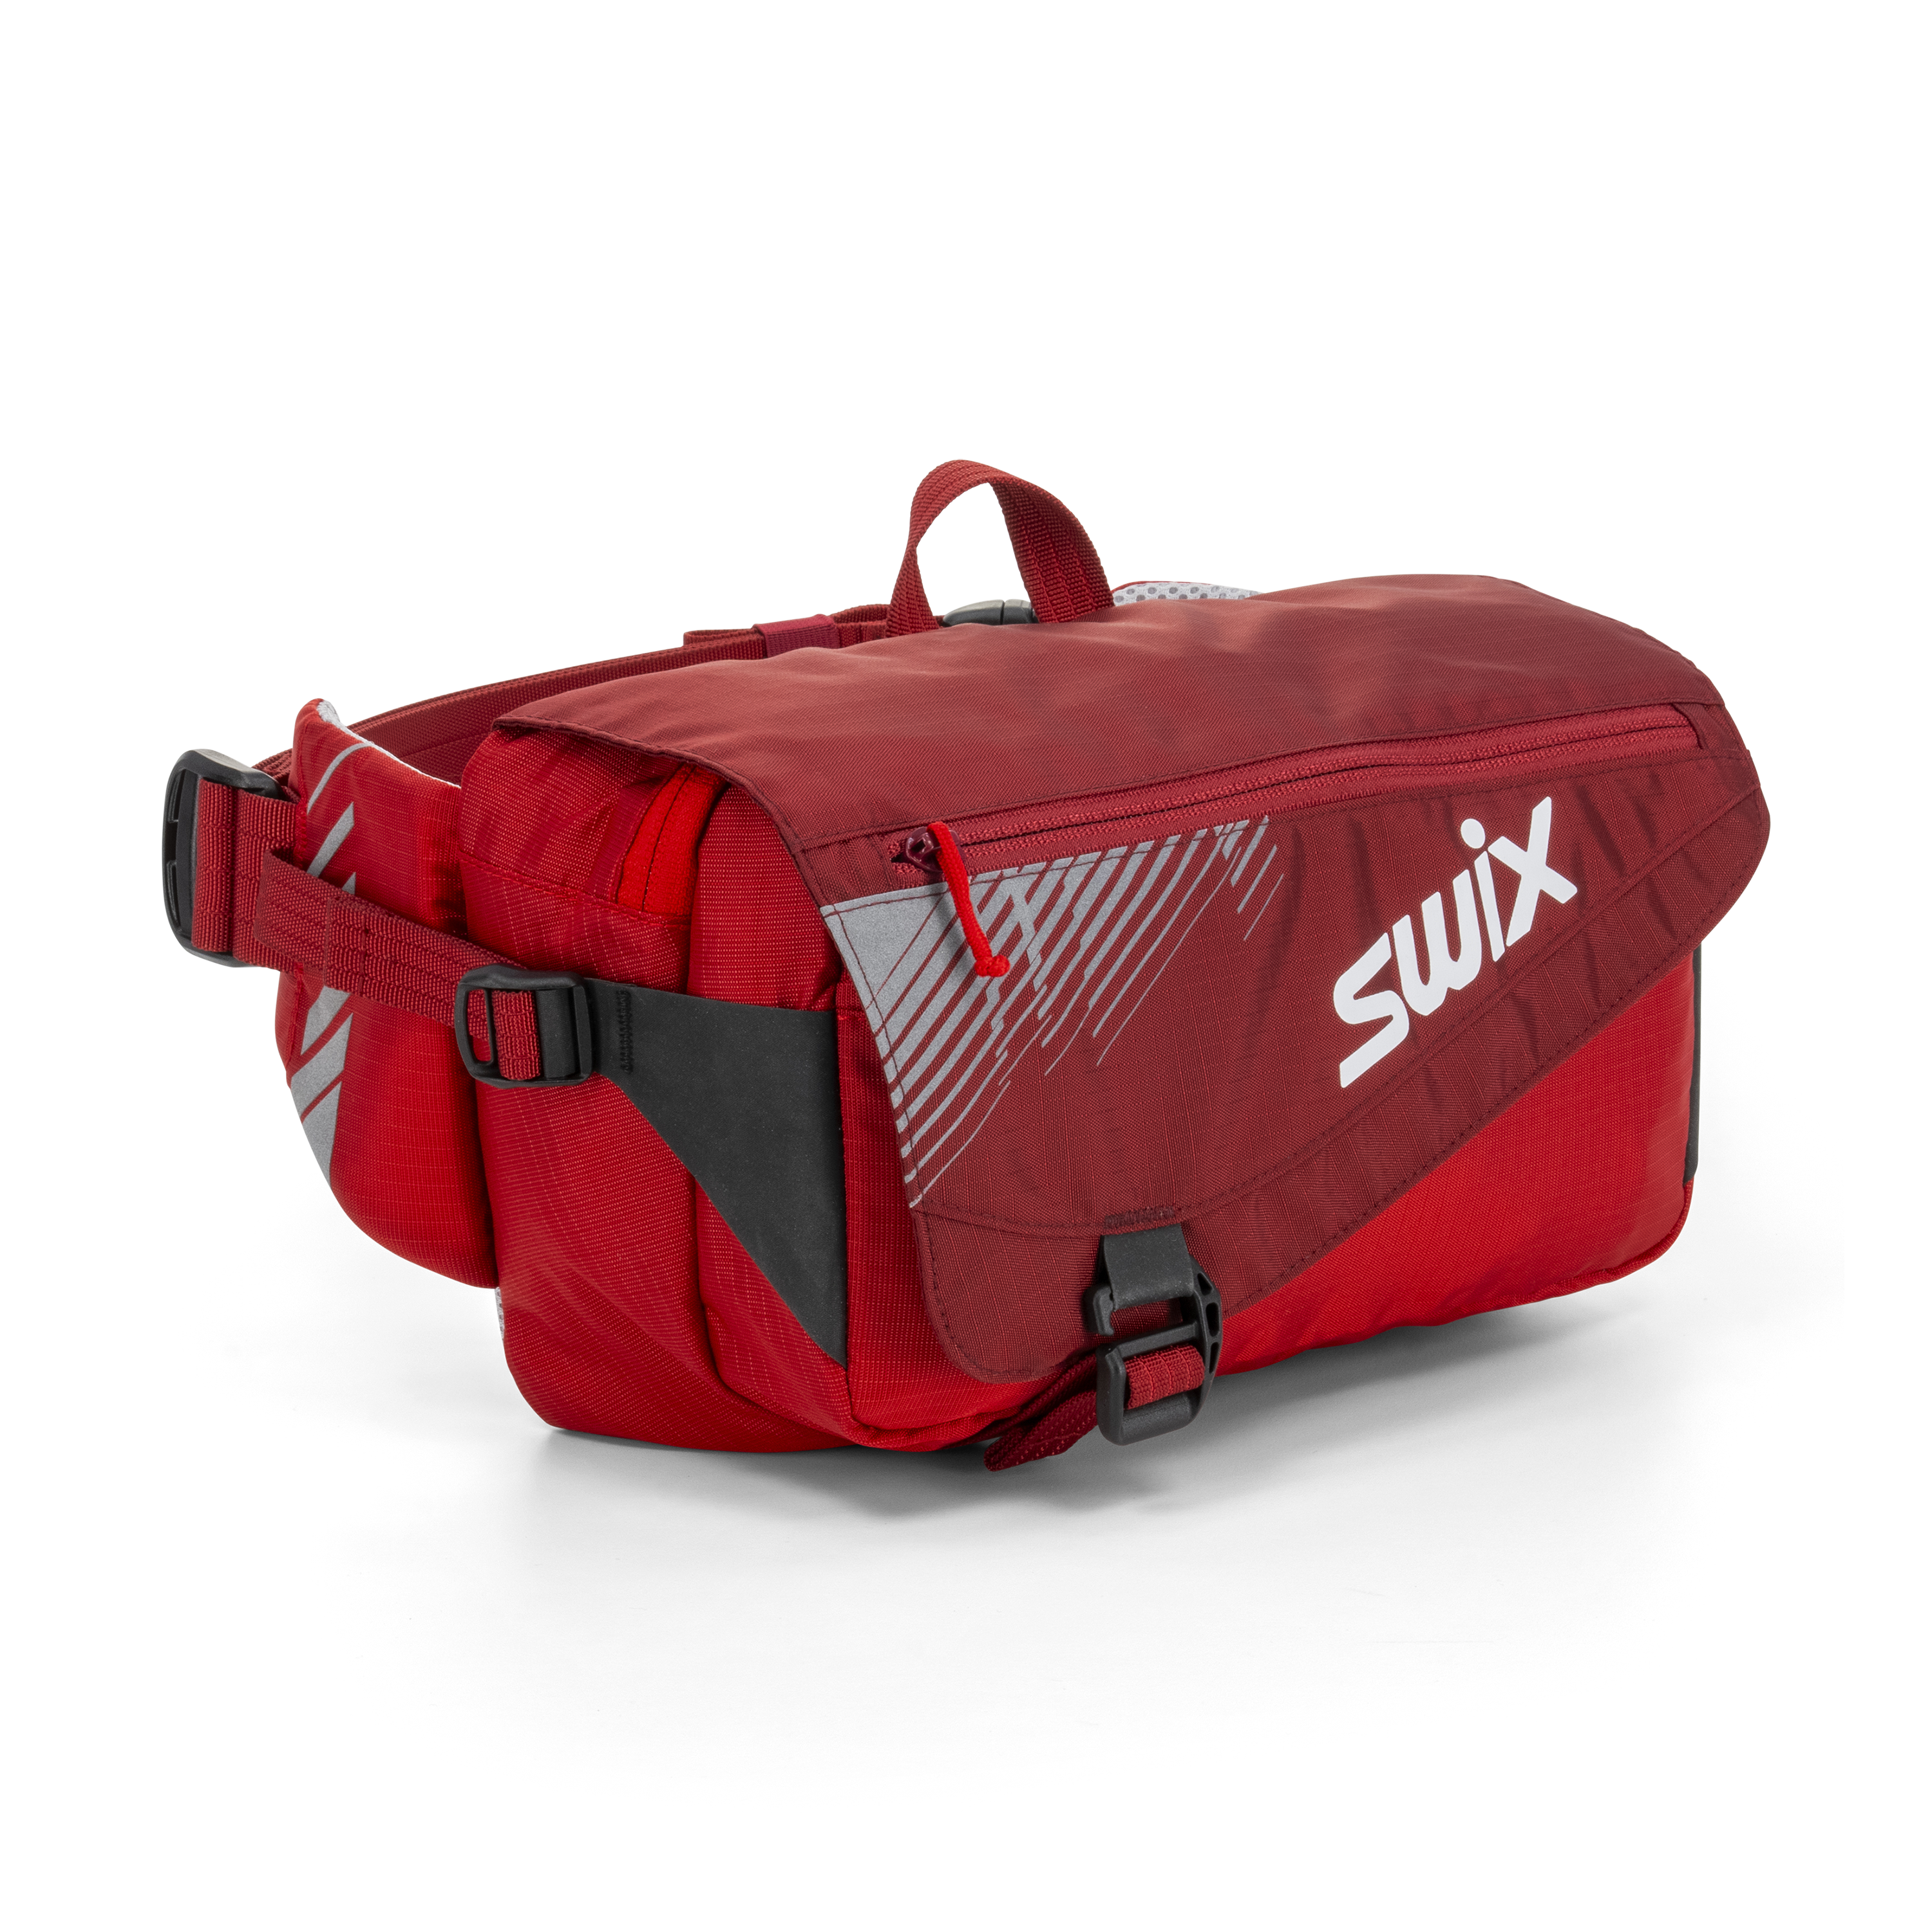 Swix Premium sport products for cross country skiing